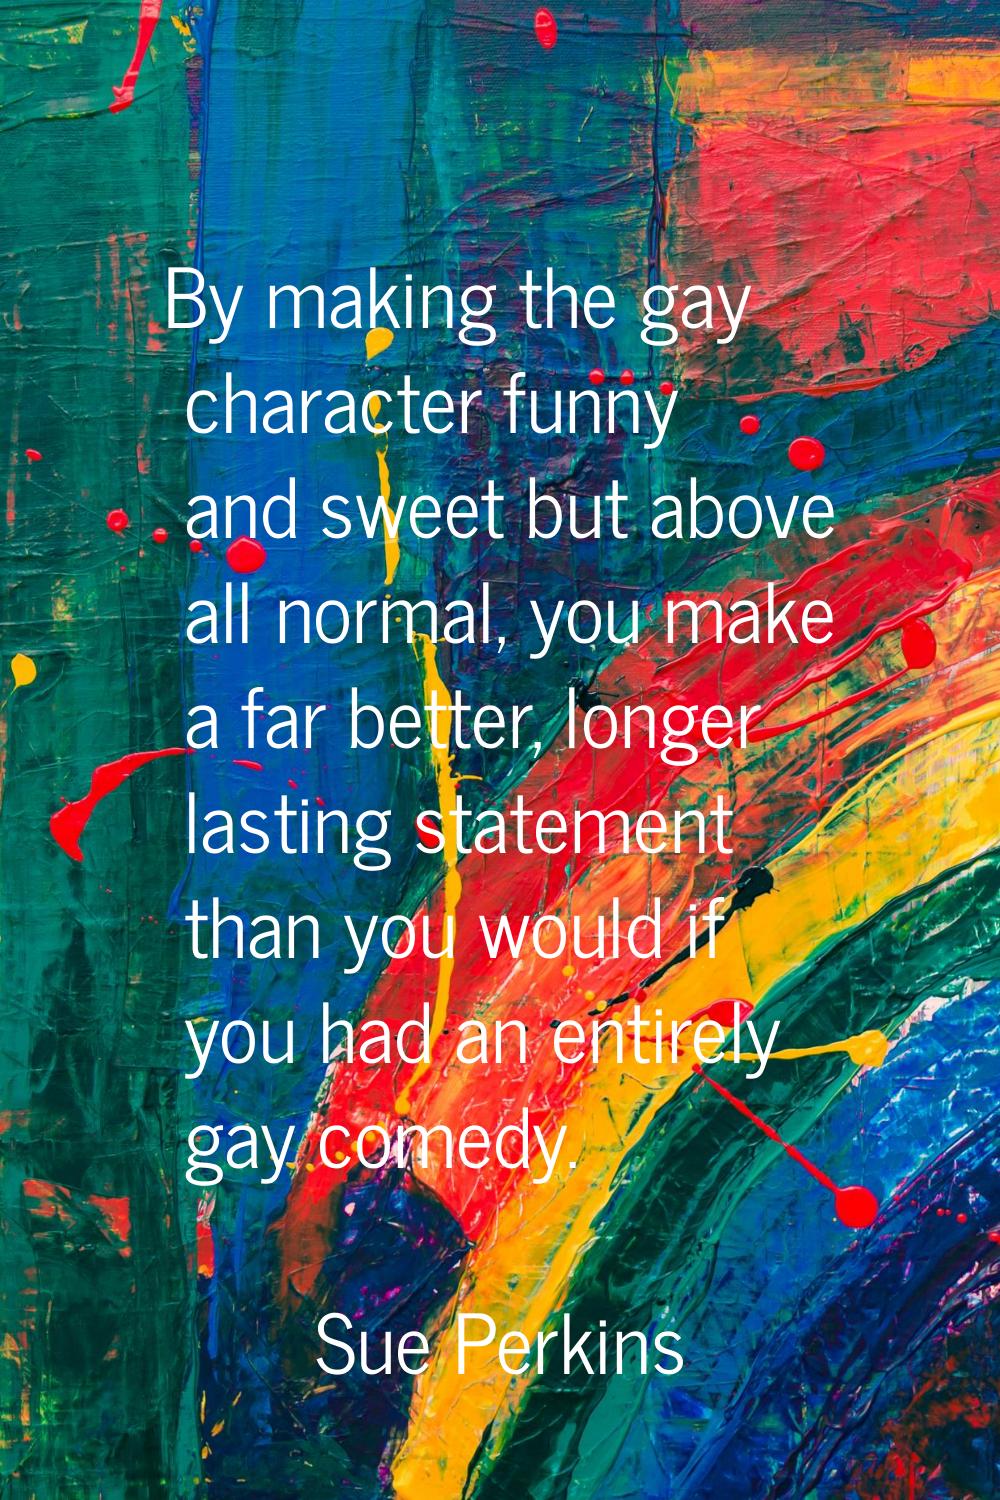 By making the gay character funny and sweet but above all normal, you make a far better, longer las